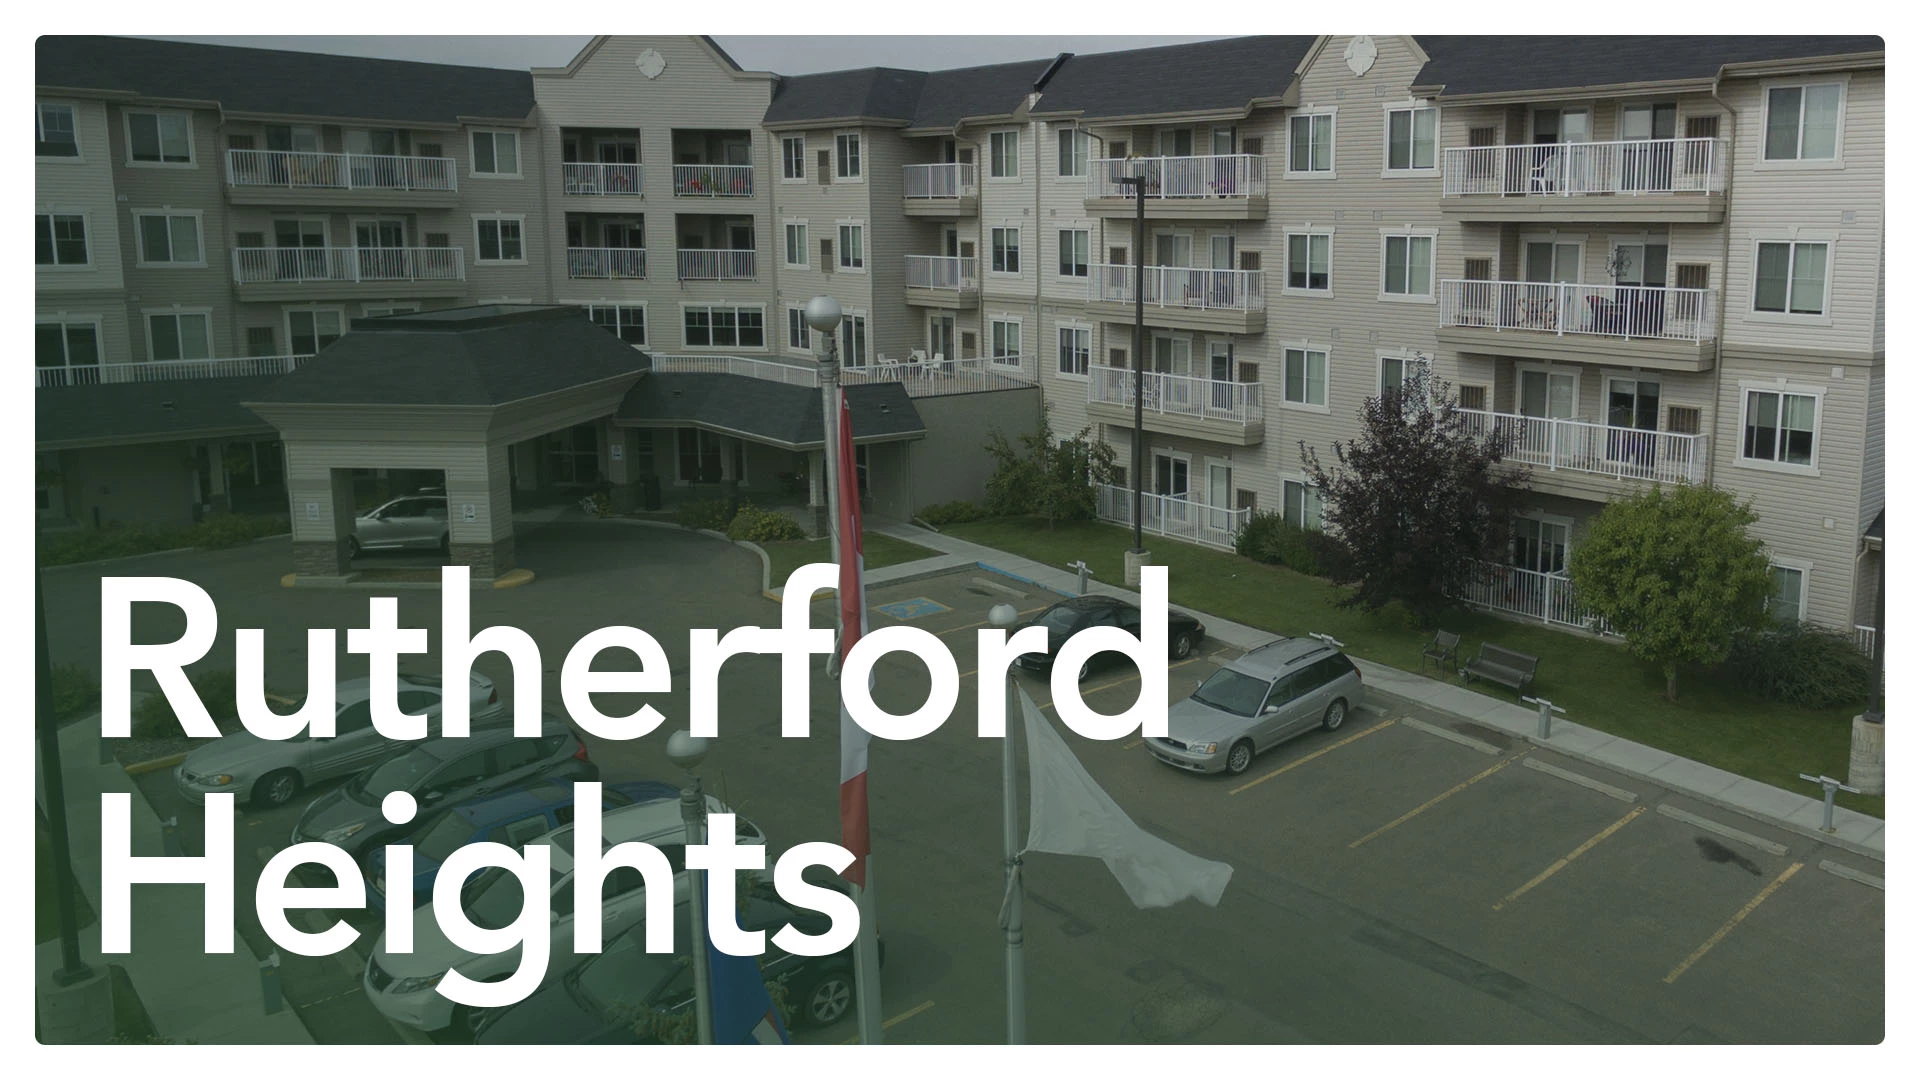 Rutherford Heights with text and gradient overlay